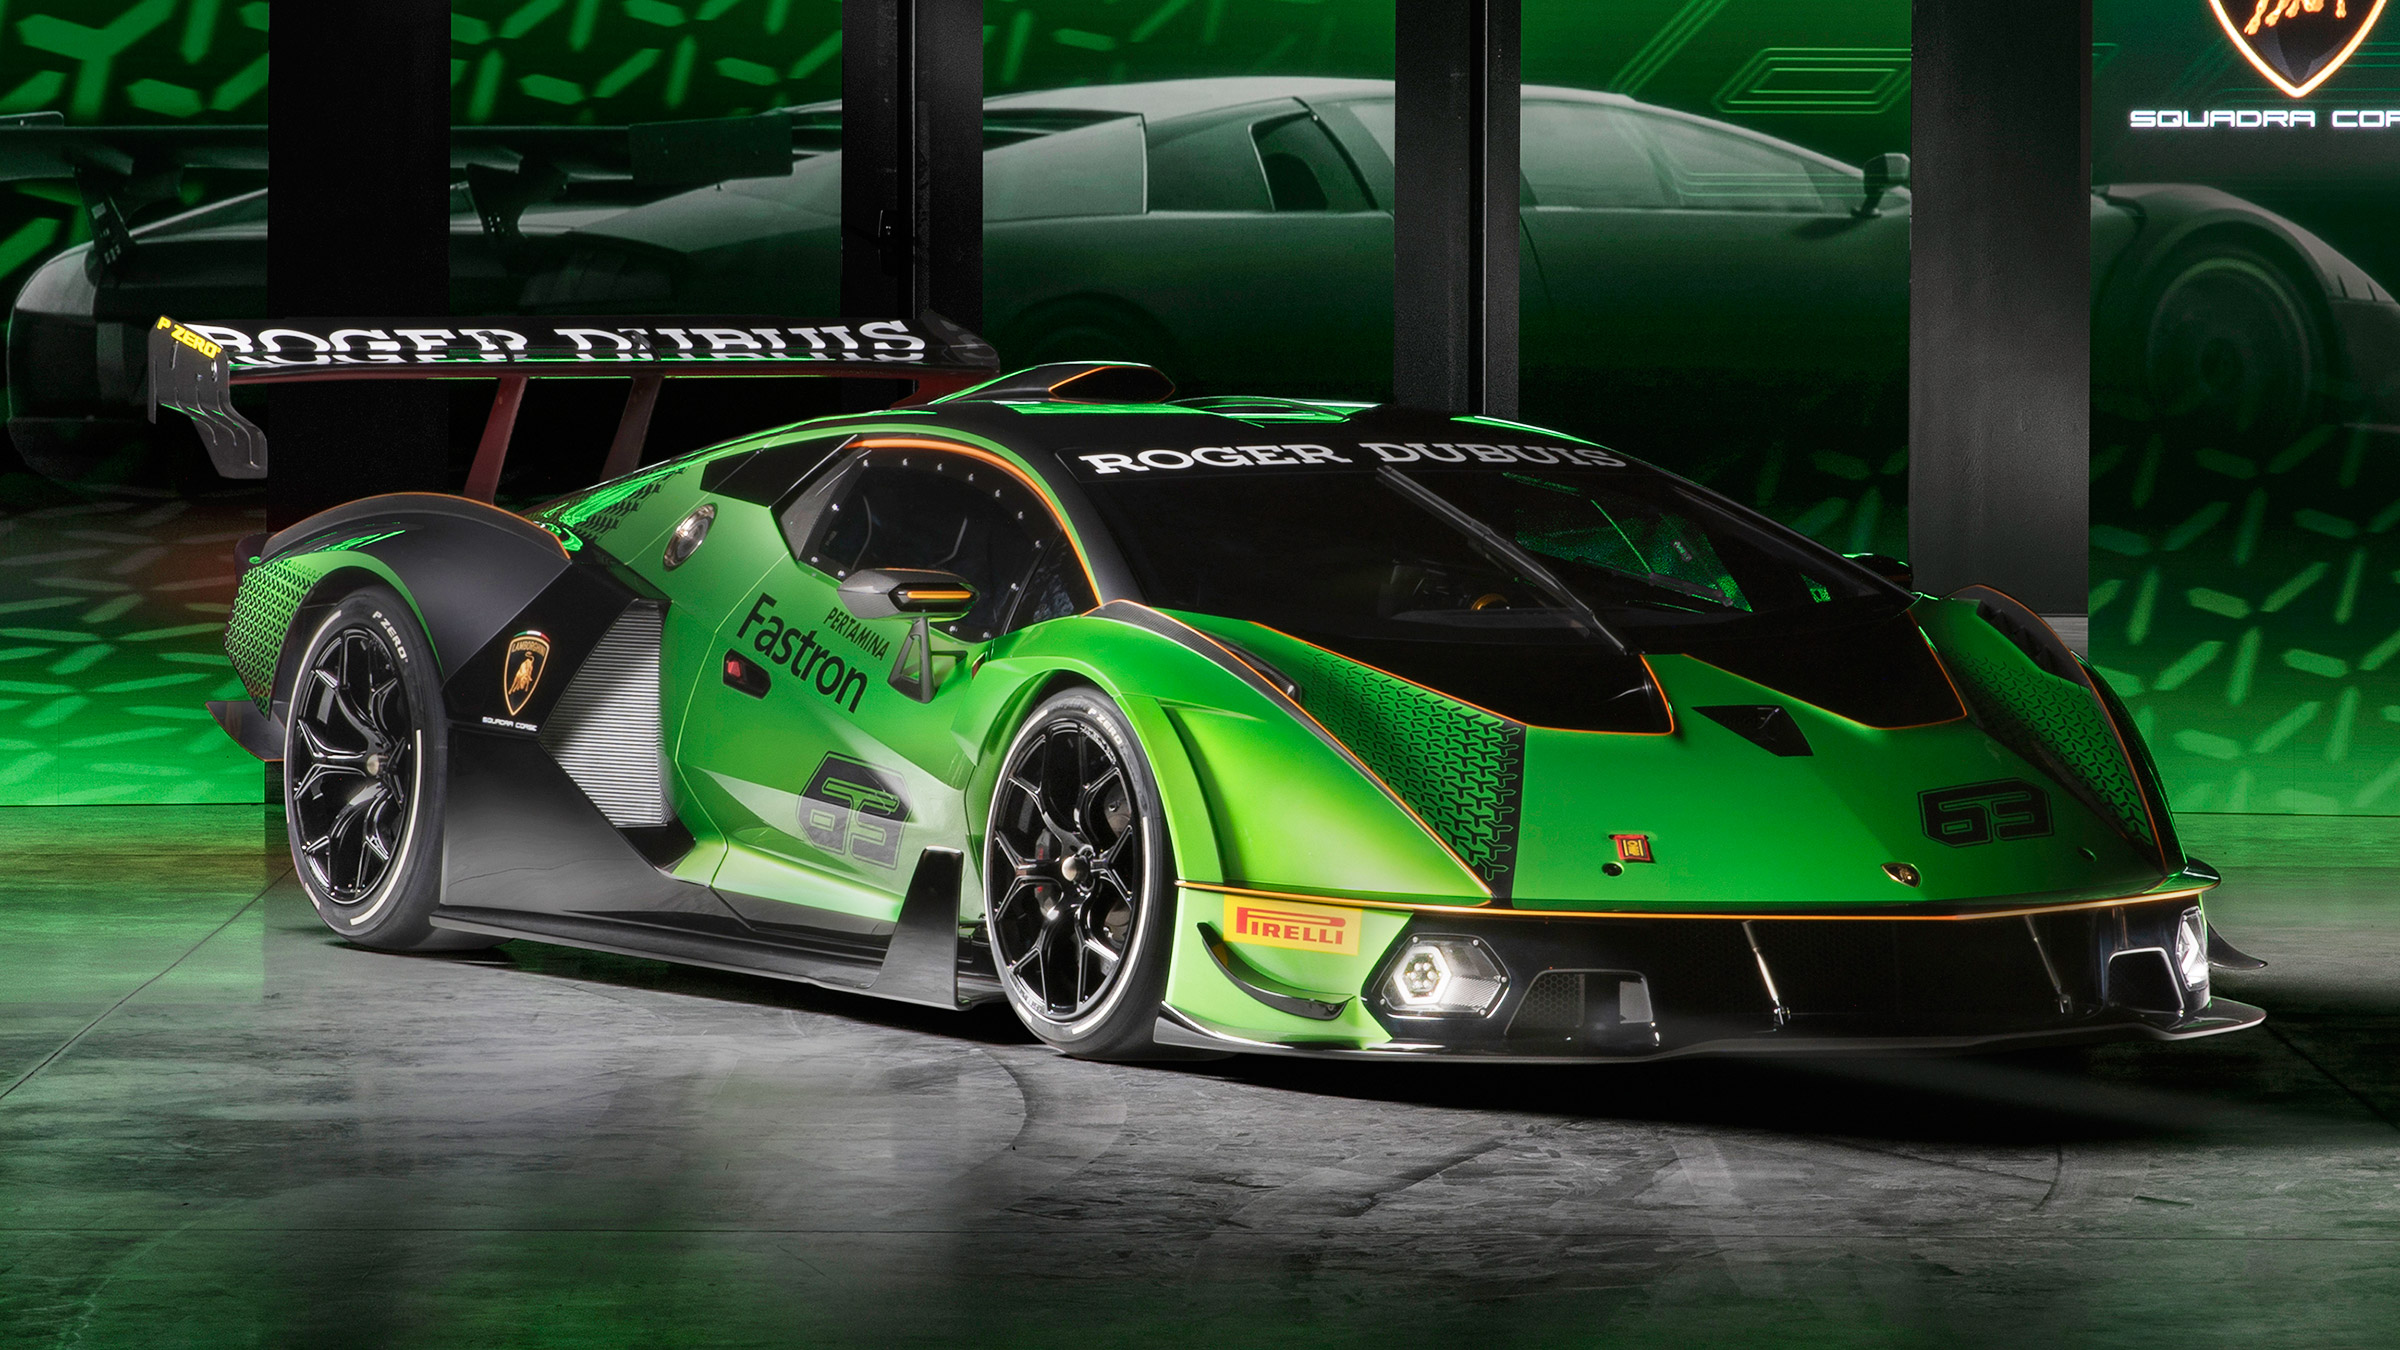 New track-only Lamborghini SCV12 hypercar officially 